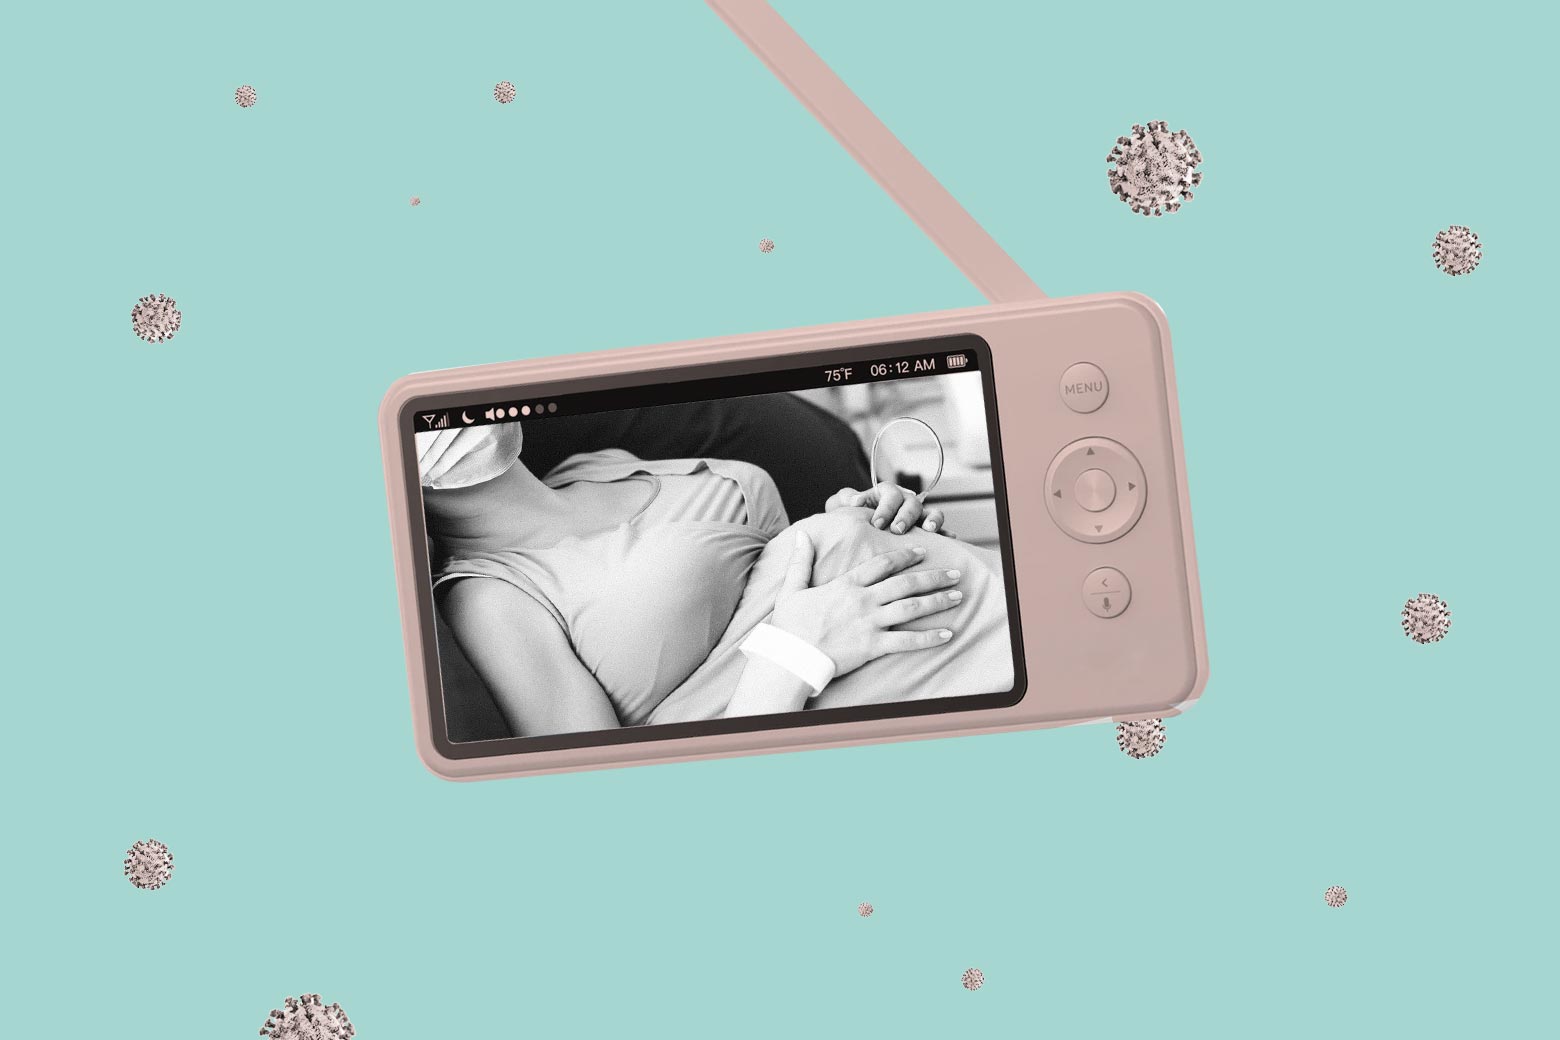 The screen of a baby monitor shows a pregnant woman's stomach.